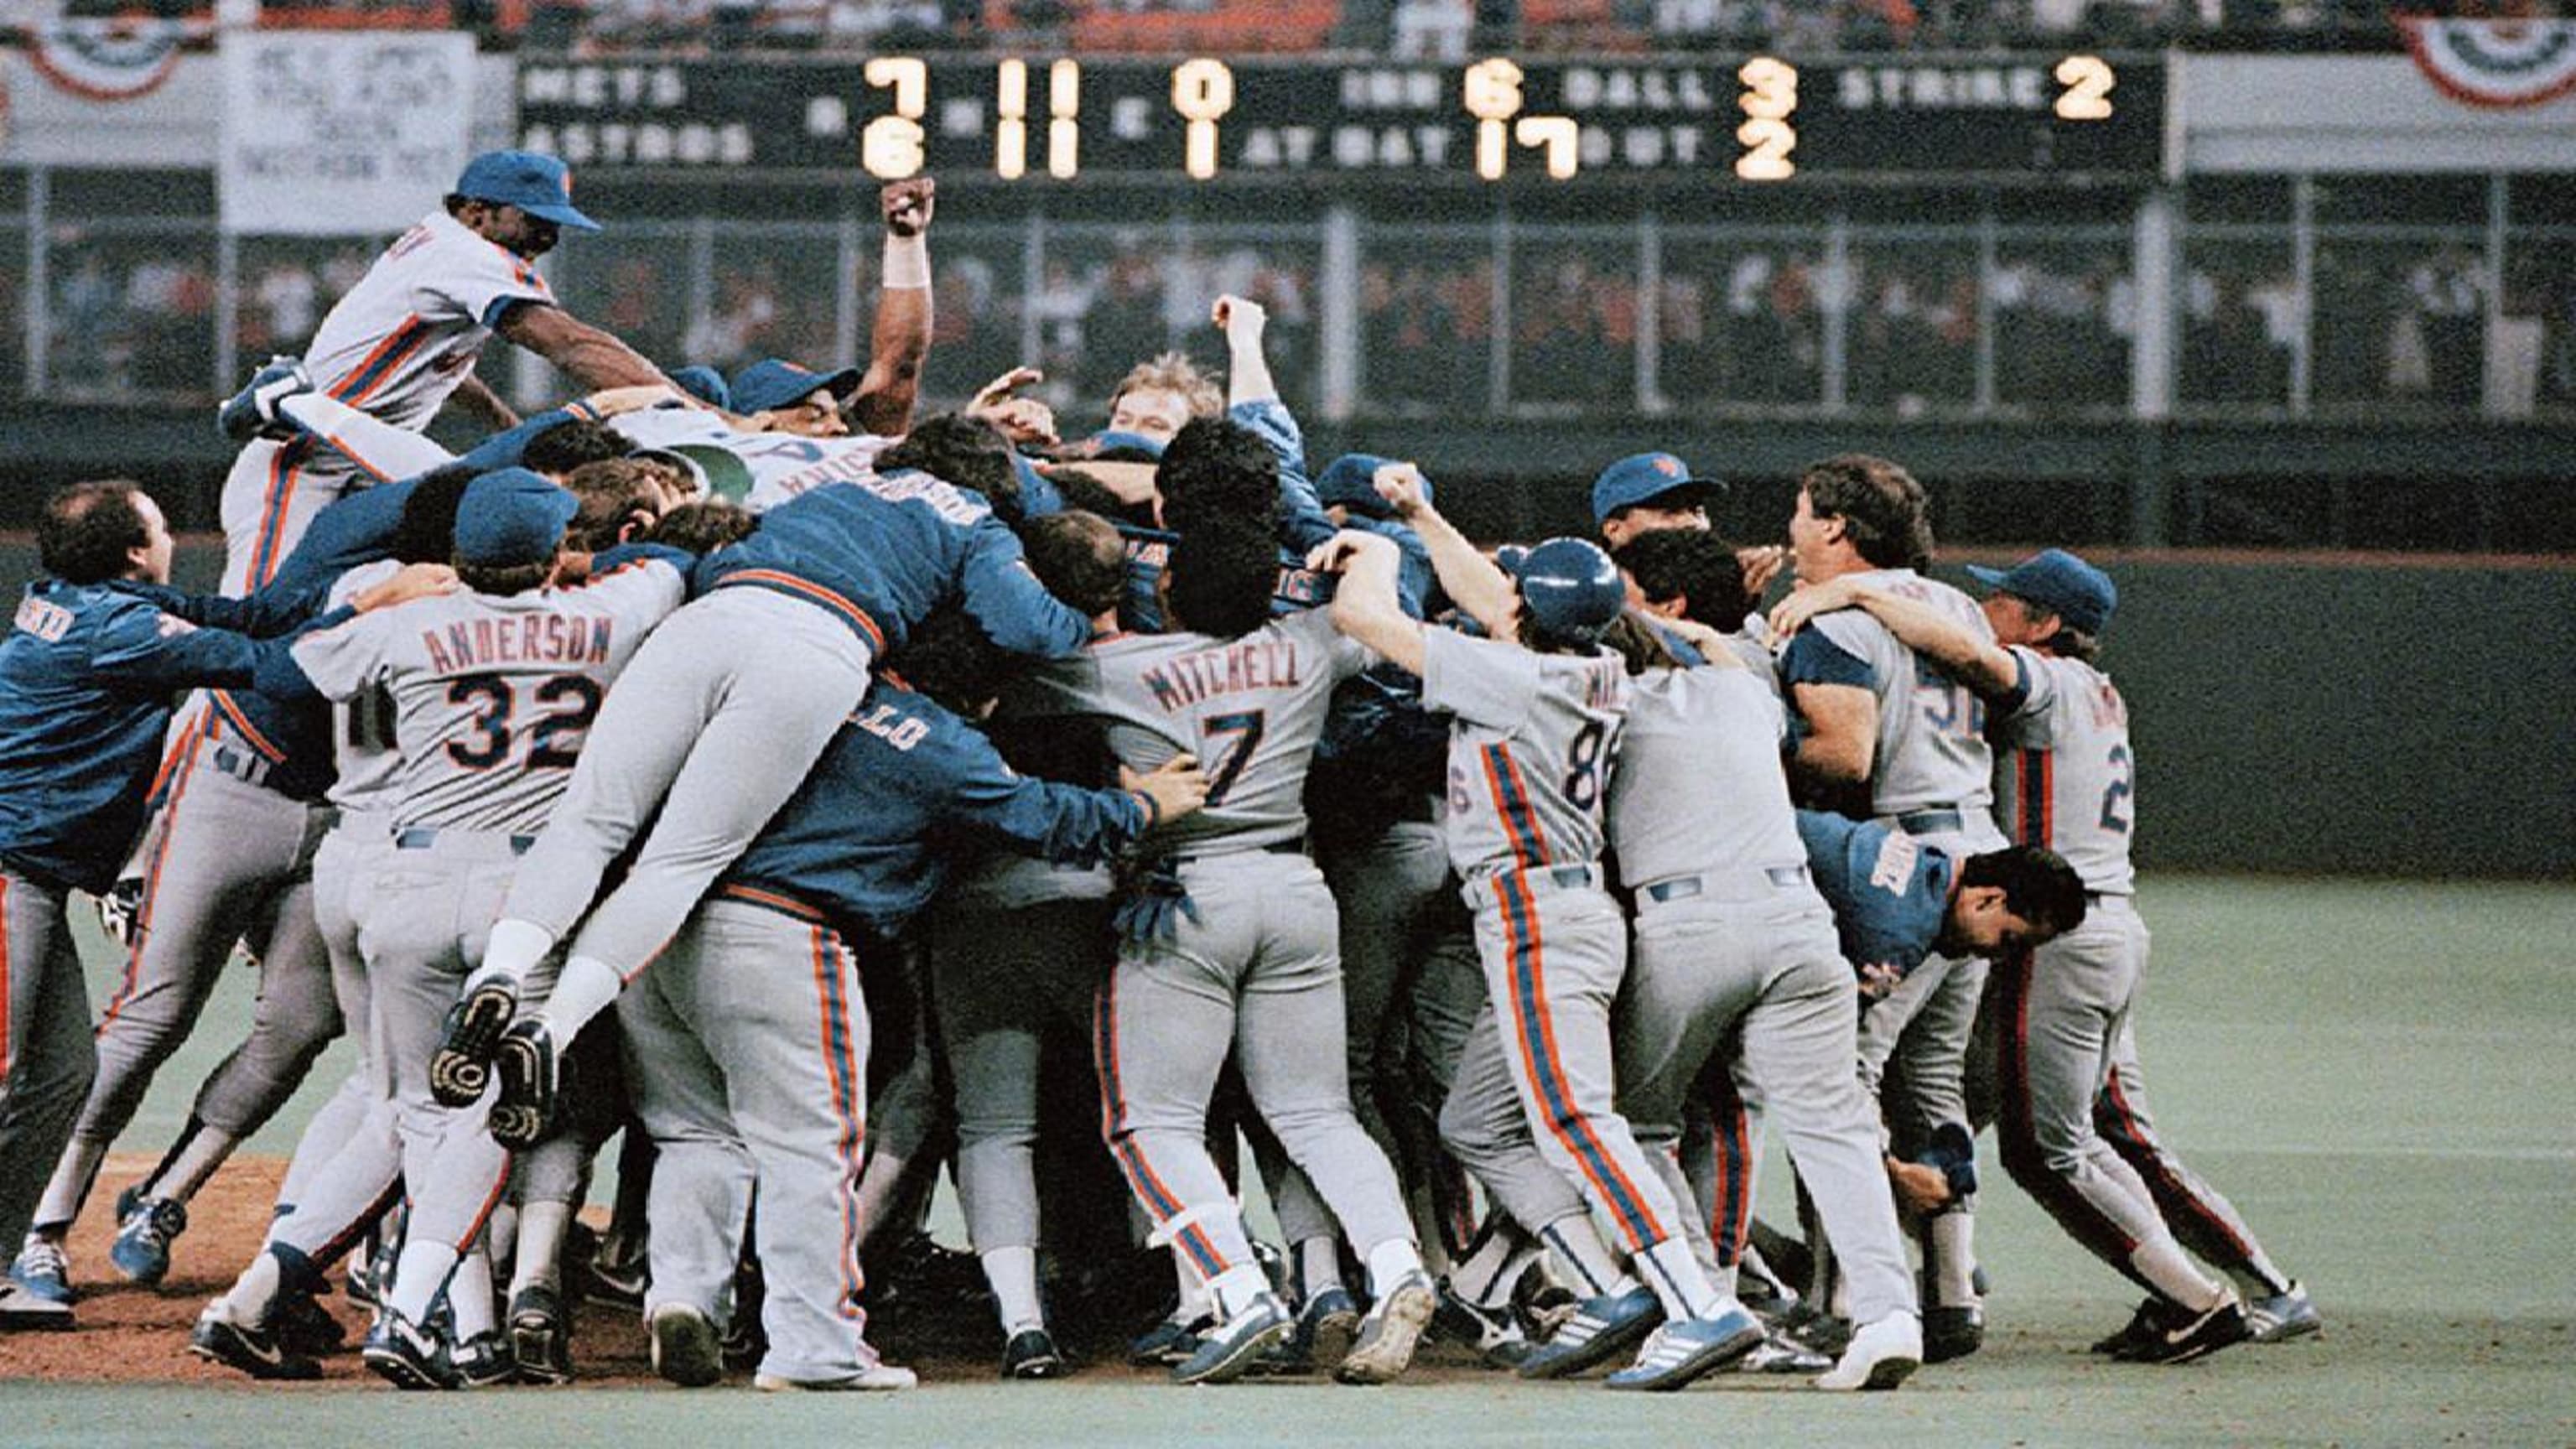 Most memorable moments from 1986 Mets season